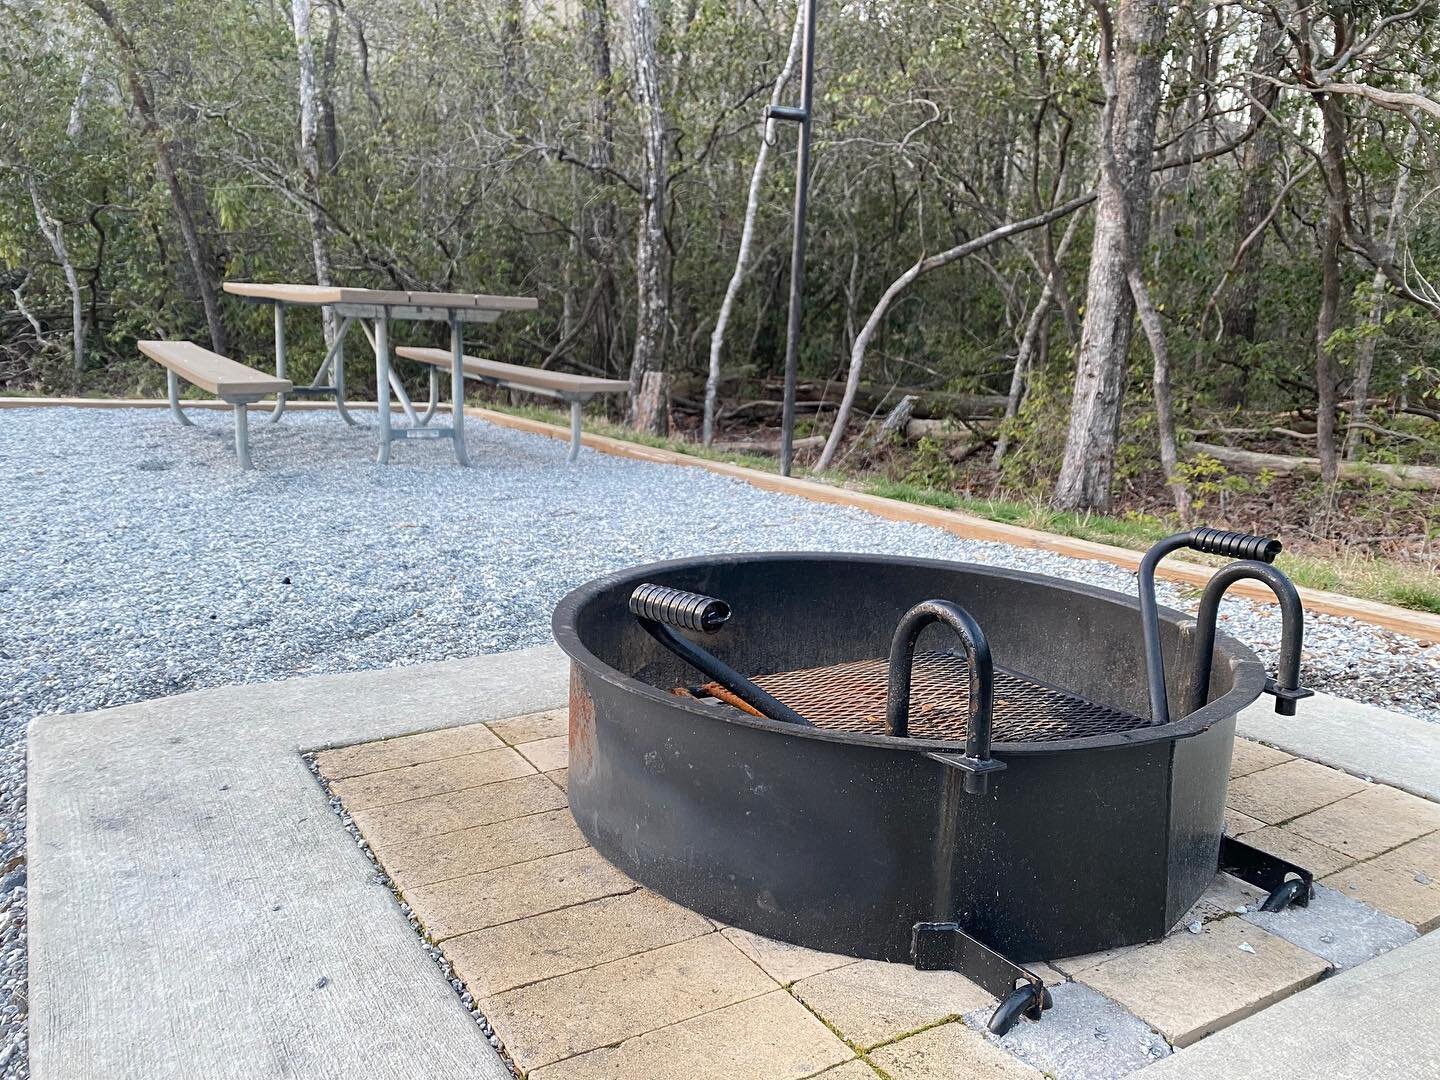 Have you booked a night at the ✨NEW✨ Gorges State Park campground yet?

With spring in the air, you don&rsquo;t want to miss out on ideal camping days. Peak season will be here before we know it - take advantage of peaceful days in your local state p